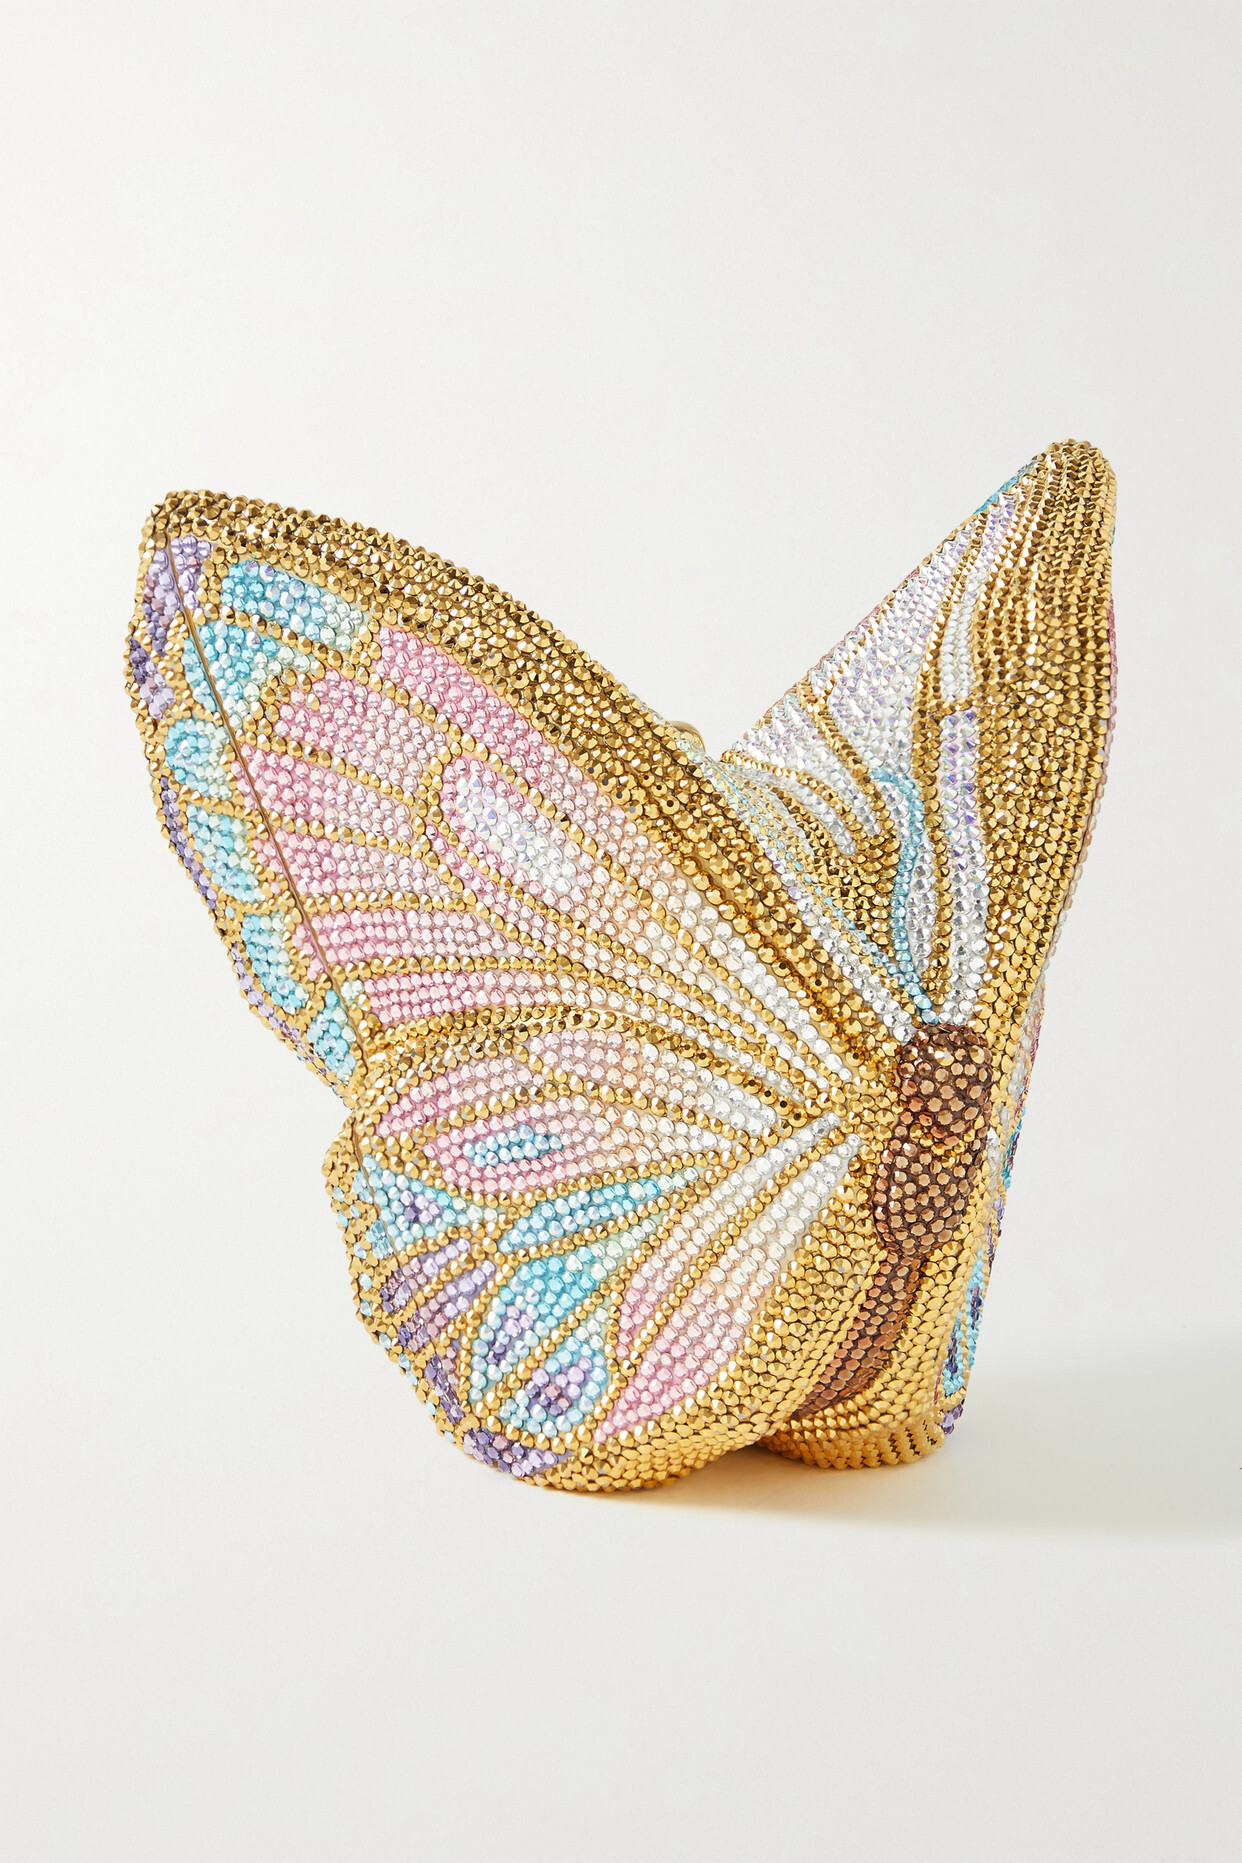 JUDITH LEIBER COUTURE - Butterfly Crystal-embellished Gold-tone Clutch - Pink